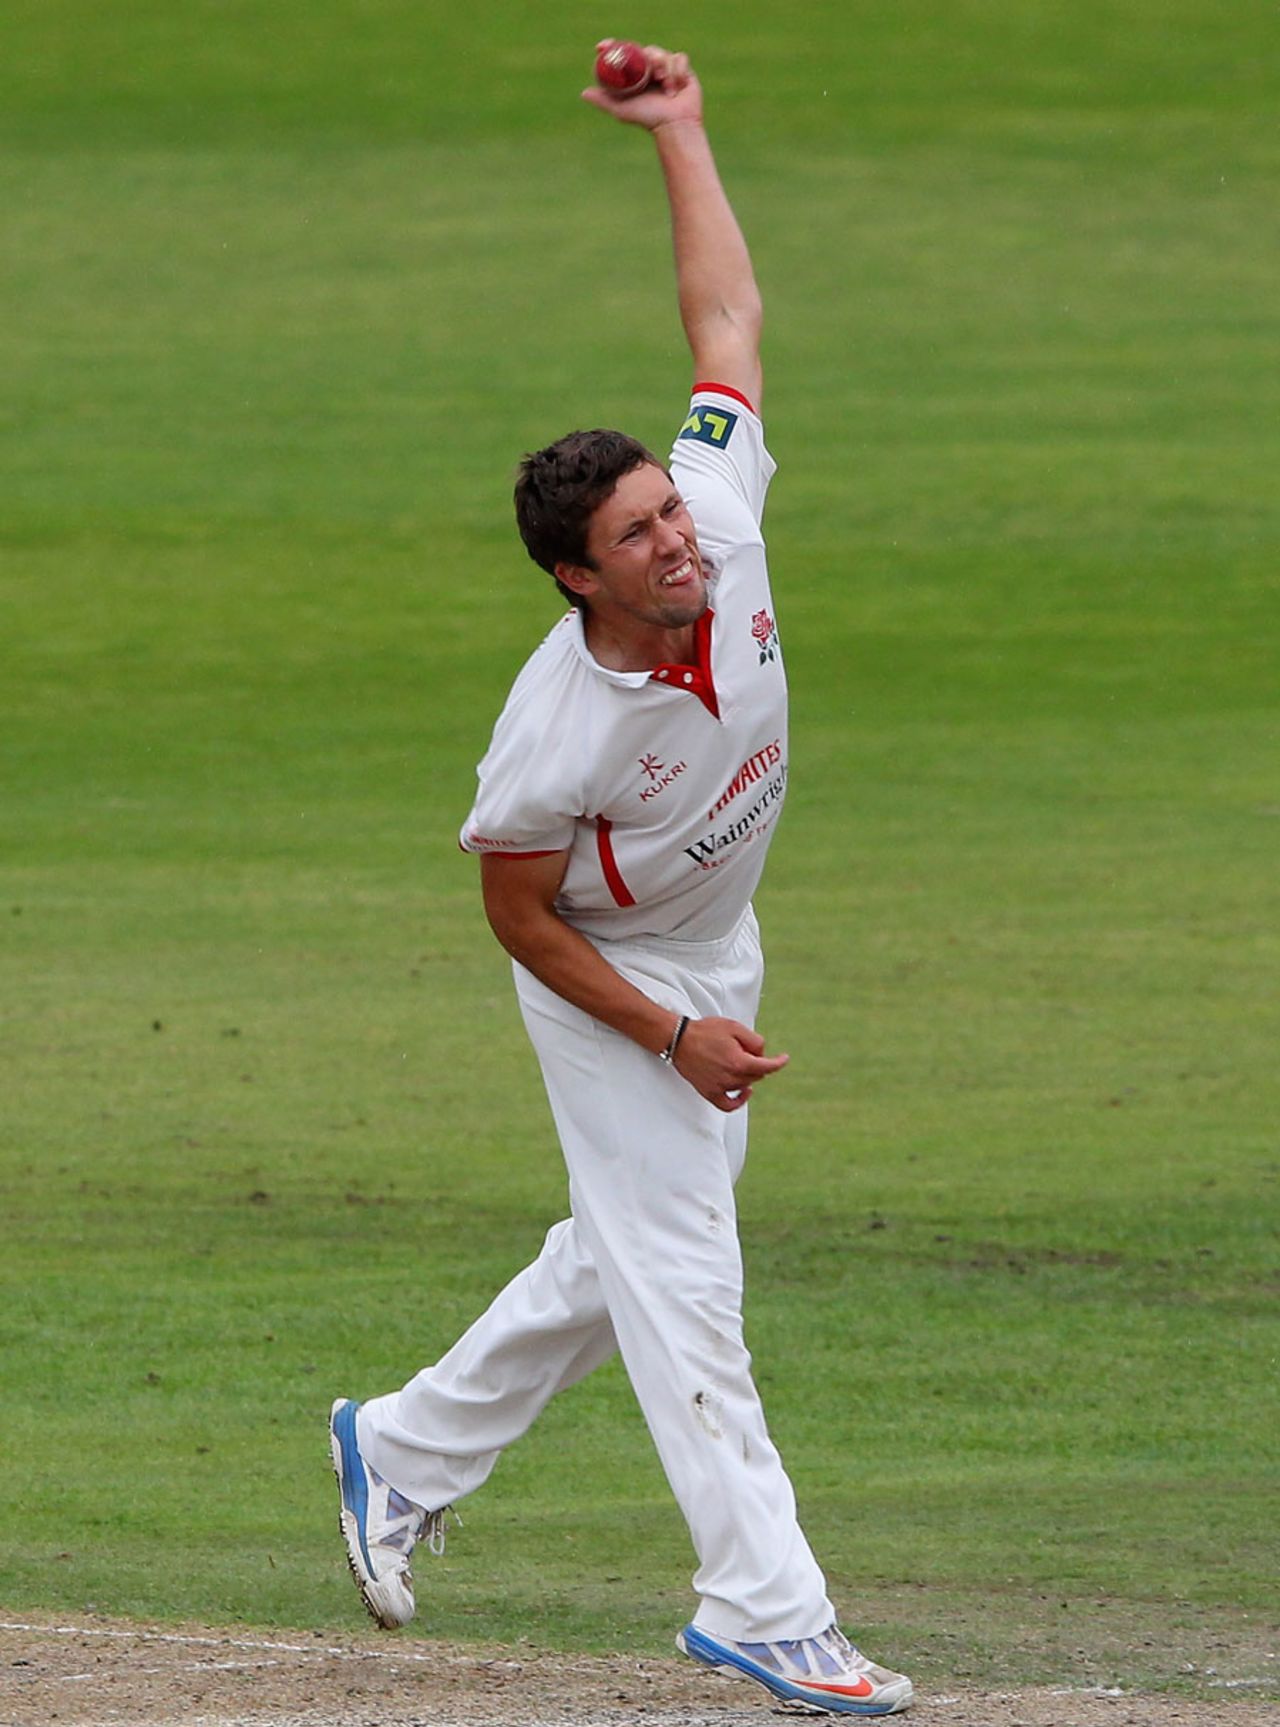 Simon Kerrigan was given an over before lunch, Lancashire v Leicestershire, County Championship, Division Two, Old Trafford, 3rd day, September, 13, 2013